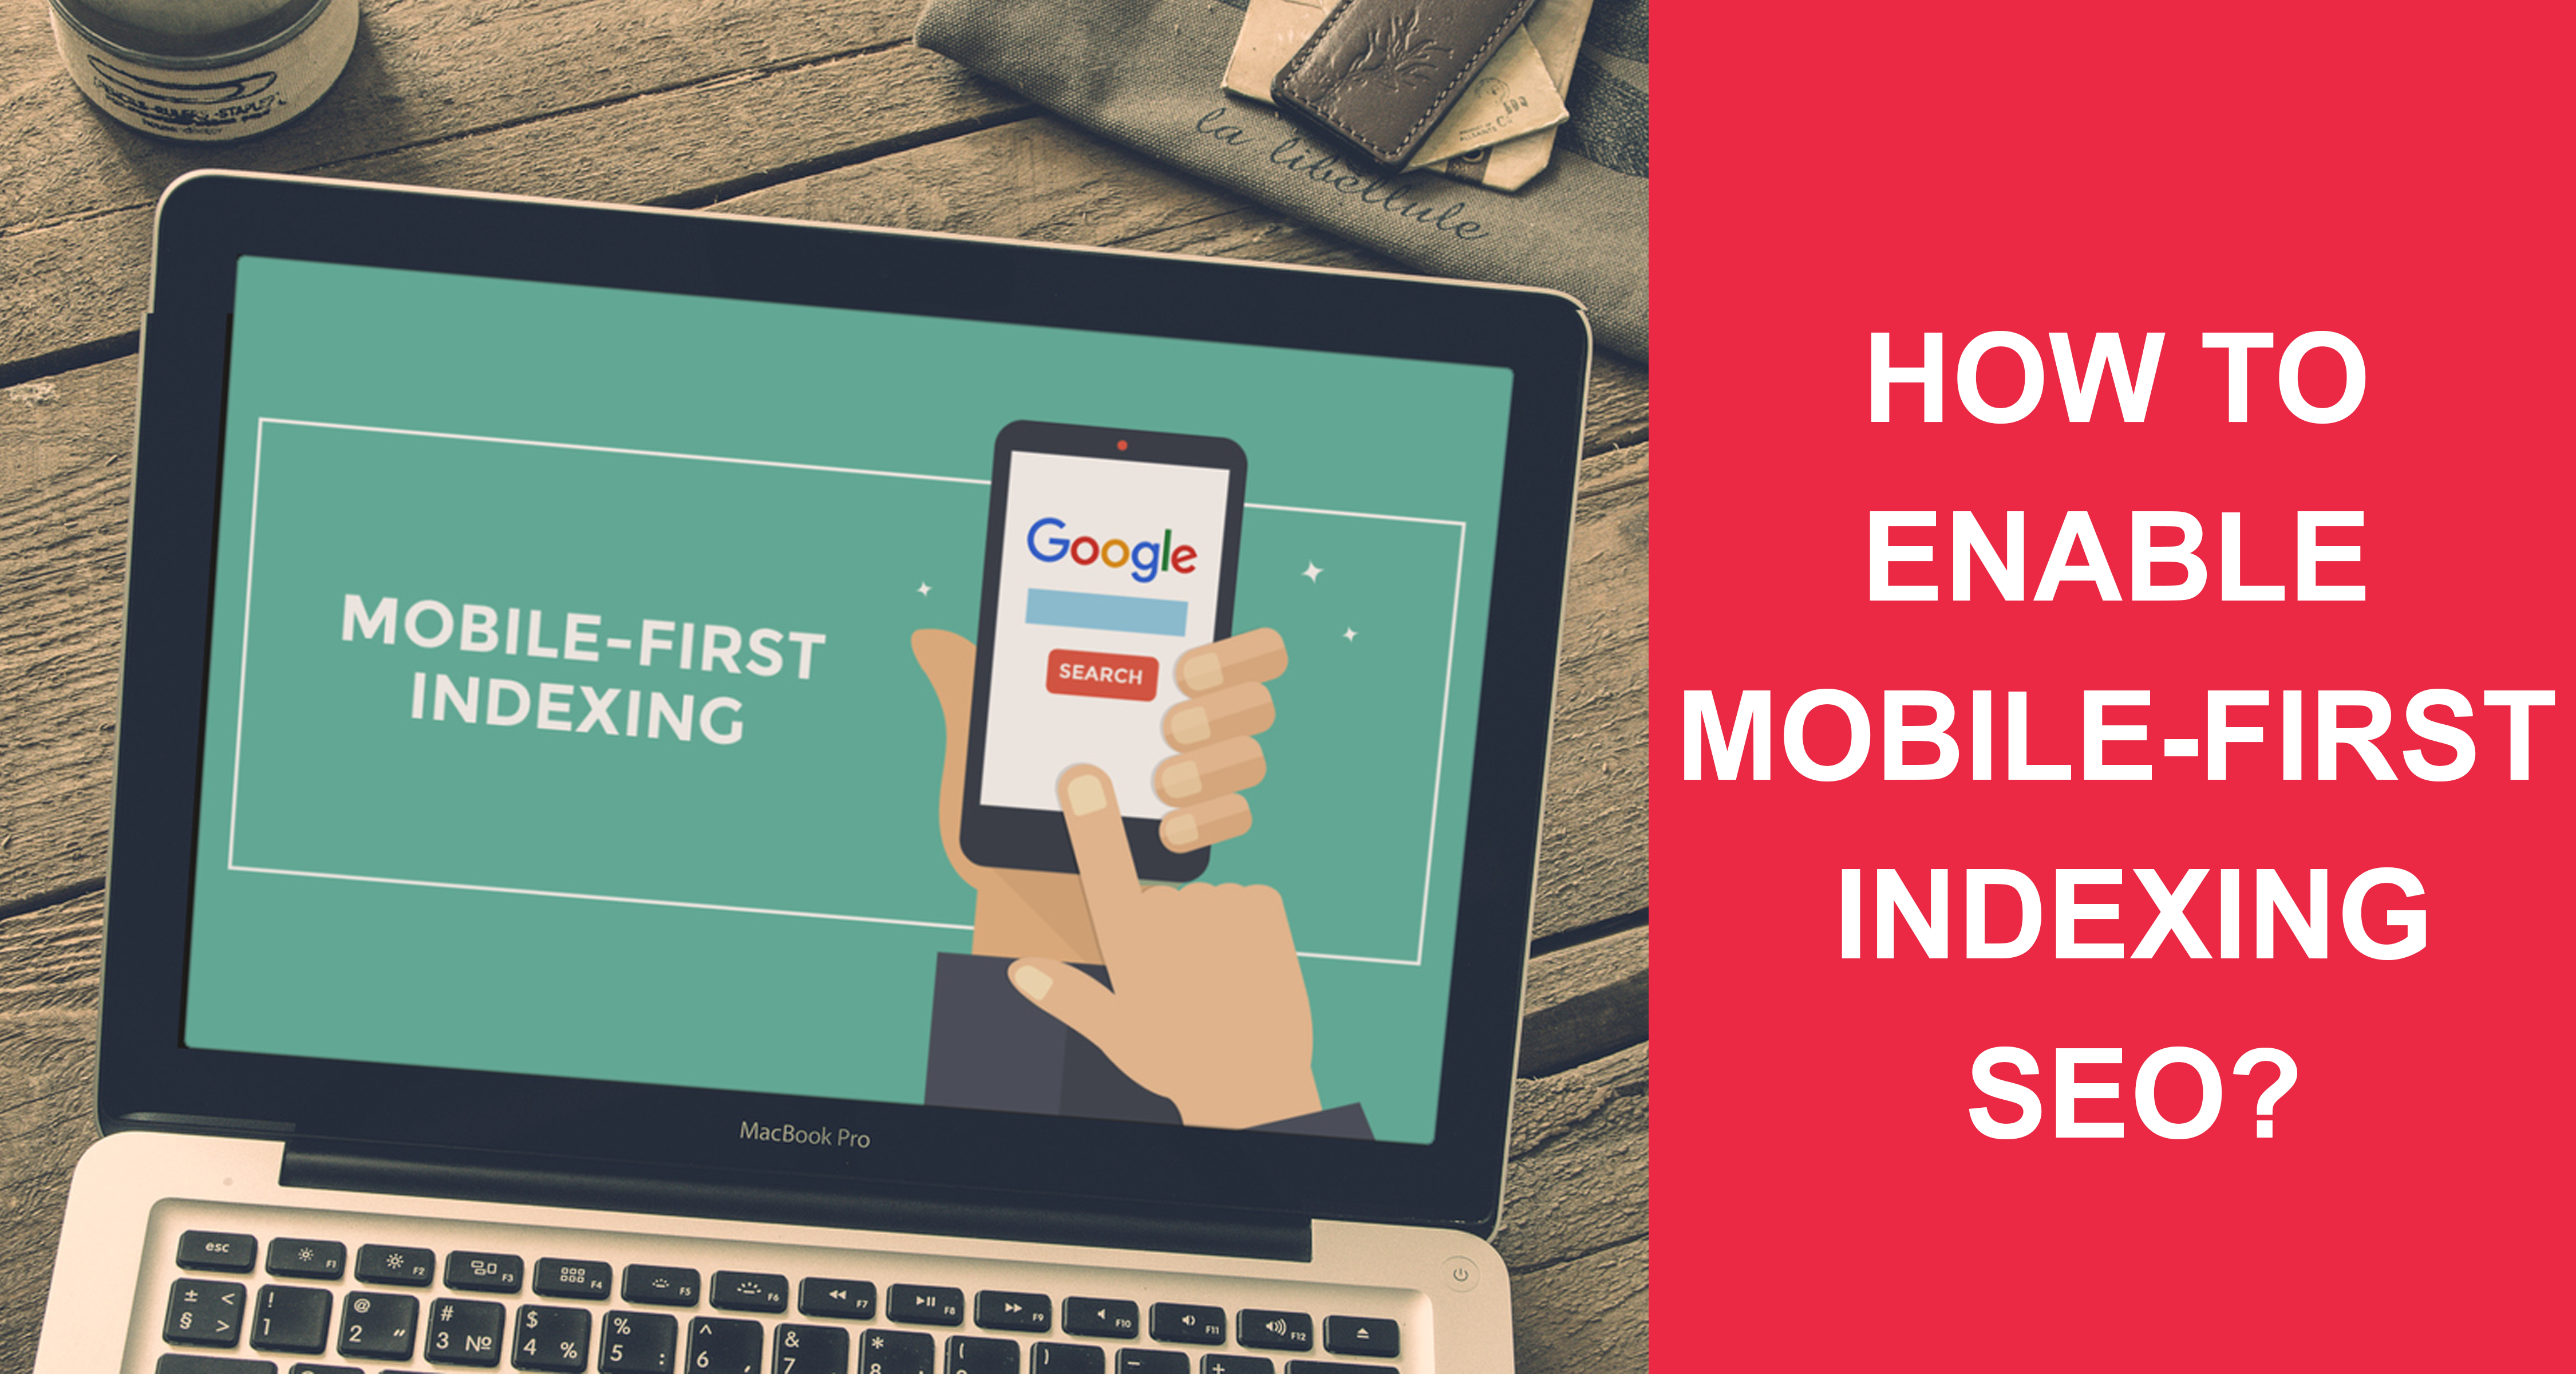 how to Enable Mobile-First Indexing SEO